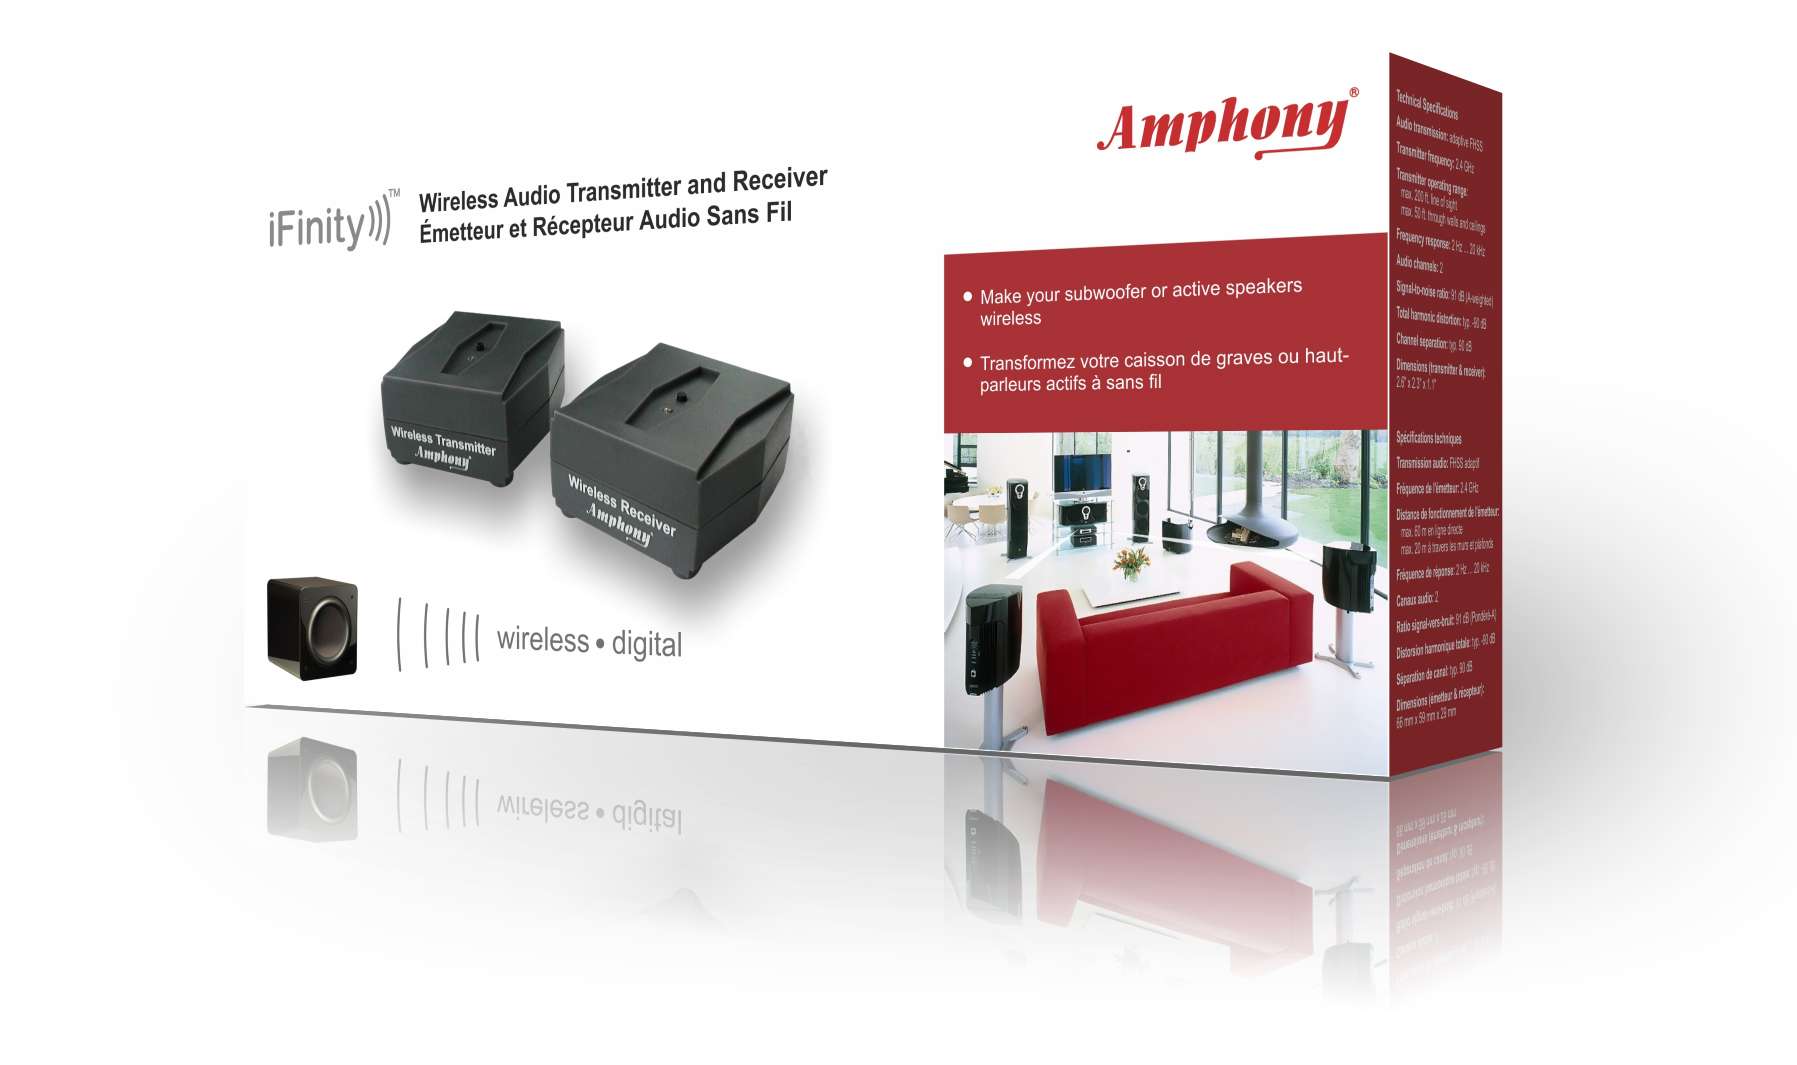 Amphony Wireless Subwoofer Kit, Makes Subwoofers and Active Speakers Wireless, Better-than Bluetooth Digital Wireless Audio - image 5 of 5